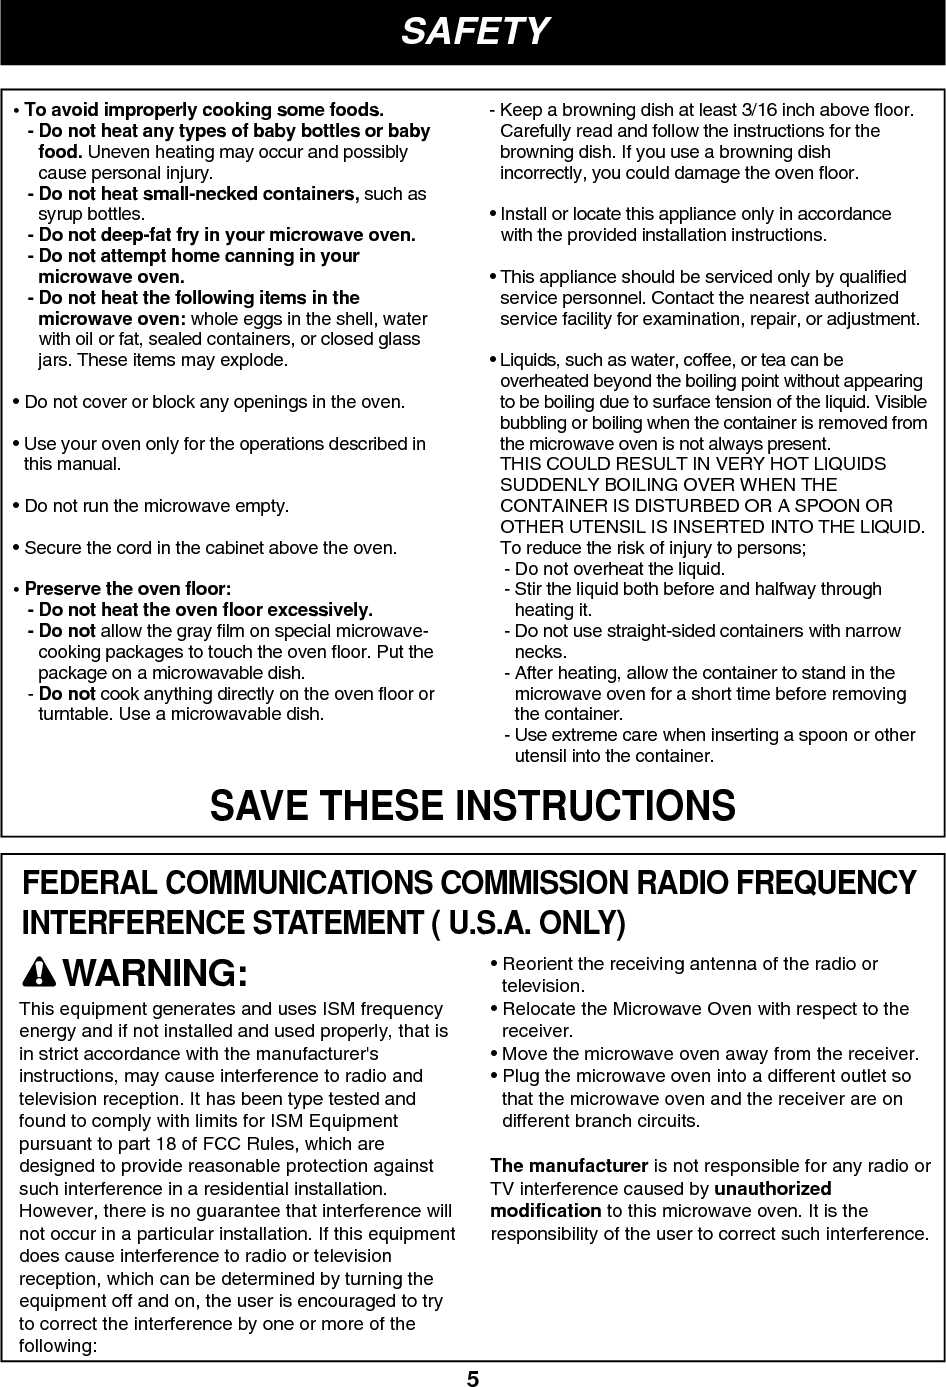 5SAFETYSAVE THESE INSTRUCTIONSFEDERAL COMMUNICATIONS COMMISSION RADIO FREQUENCYINTERFERENCE STATEMENT ( U.S.A. ONLY)• To avoid improperly cooking some foods.- Do not heat any types of baby bottles or babyfood. Uneven heating may occur and possiblycause personal injury.- Do not heat small-necked containers, such assyrup bottles.- Do not deep-fat fry in your microwave oven.- Do not attempt home canning in yourmicrowave oven.- Do not heat the following items in themicrowave oven: whole eggs in the shell, waterwith oil or fat, sealed containers, or closed glassjars. These items may explode.• Do not cover or block any openings in the oven.• Use your oven only for the operations described inthis manual.• Do not run the microwave empty.• Secure the cord in the cabinet above the oven.• Preserve the oven floor:- Do not heat the oven floor excessively.- Do not allow the gray film on special microwave-cooking packages to touch the oven floor. Put thepackage on a microwavable dish.- Do not cook anything directly on the oven floor orturntable. Use a microwavable dish.- Keep a browning dish at least 3/16 inch above floor.Carefully read and follow the instructions for thebrowning dish. If you use a browning dishincorrectly, you could damage the oven floor.• Install or locate this appliance only in accordancewith the provided installation instructions.• This appliance should be serviced only by qualifiedservice personnel. Contact the nearest authorizedservice facility for examination, repair, or adjustment.• Liquids, such as water, coffee, or tea can beoverheated beyond the boiling point without appearingto be boiling due to surface tension of the liquid. Visiblebubbling or boiling when the container is removed fromthe microwave oven is not always present.THIS COULD RESULT IN VERY HOT LIQUIDSSUDDENLY BOILING OVER WHEN THECONTAINER IS DISTURBED OR A SPOON OROTHER UTENSIL IS INSERTED INTO THE LIQUID.To reduce the risk of injury to persons;- Do not overheat the liquid.- Stir the liquid both before and halfway throughheating it.- Do not use straight-sided containers with narrownecks.- After heating, allow the container to stand in themicrowave oven for a short time before removingthe container.- Use extreme care when inserting a spoon or otherutensil into the container.This equipment generates and uses ISM frequencyenergy and if not installed and used properly, that isin strict accordance with the manufacturer&apos;sinstructions, may cause interference to radio andtelevision reception. It has been type tested andfound to comply with limits for ISM Equipmentpursuant to part 18 of FCC Rules, which aredesigned to provide reasonable protection againstsuch interference in a residential installation.However, there is no guarantee that interference willnot occur in a particular installation. If this equipmentdoes cause interference to radio or televisionreception, which can be determined by turning theequipment off and on, the user is encouraged to tryto correct the interference by one or more of thefollowing:• Reorient the receiving antenna of the radio ortelevision.• Relocate the Microwave Oven with respect to thereceiver.• Move the microwave oven away from the receiver.• Plug the microwave oven into a different outlet sothat the microwave oven and the receiver are ondifferent branch circuits.The manufacturer is not responsible for any radio orTV interference caused by unauthorizedmodification to this microwave oven. It is theresponsibility of the user to correct such interference.WARNING: